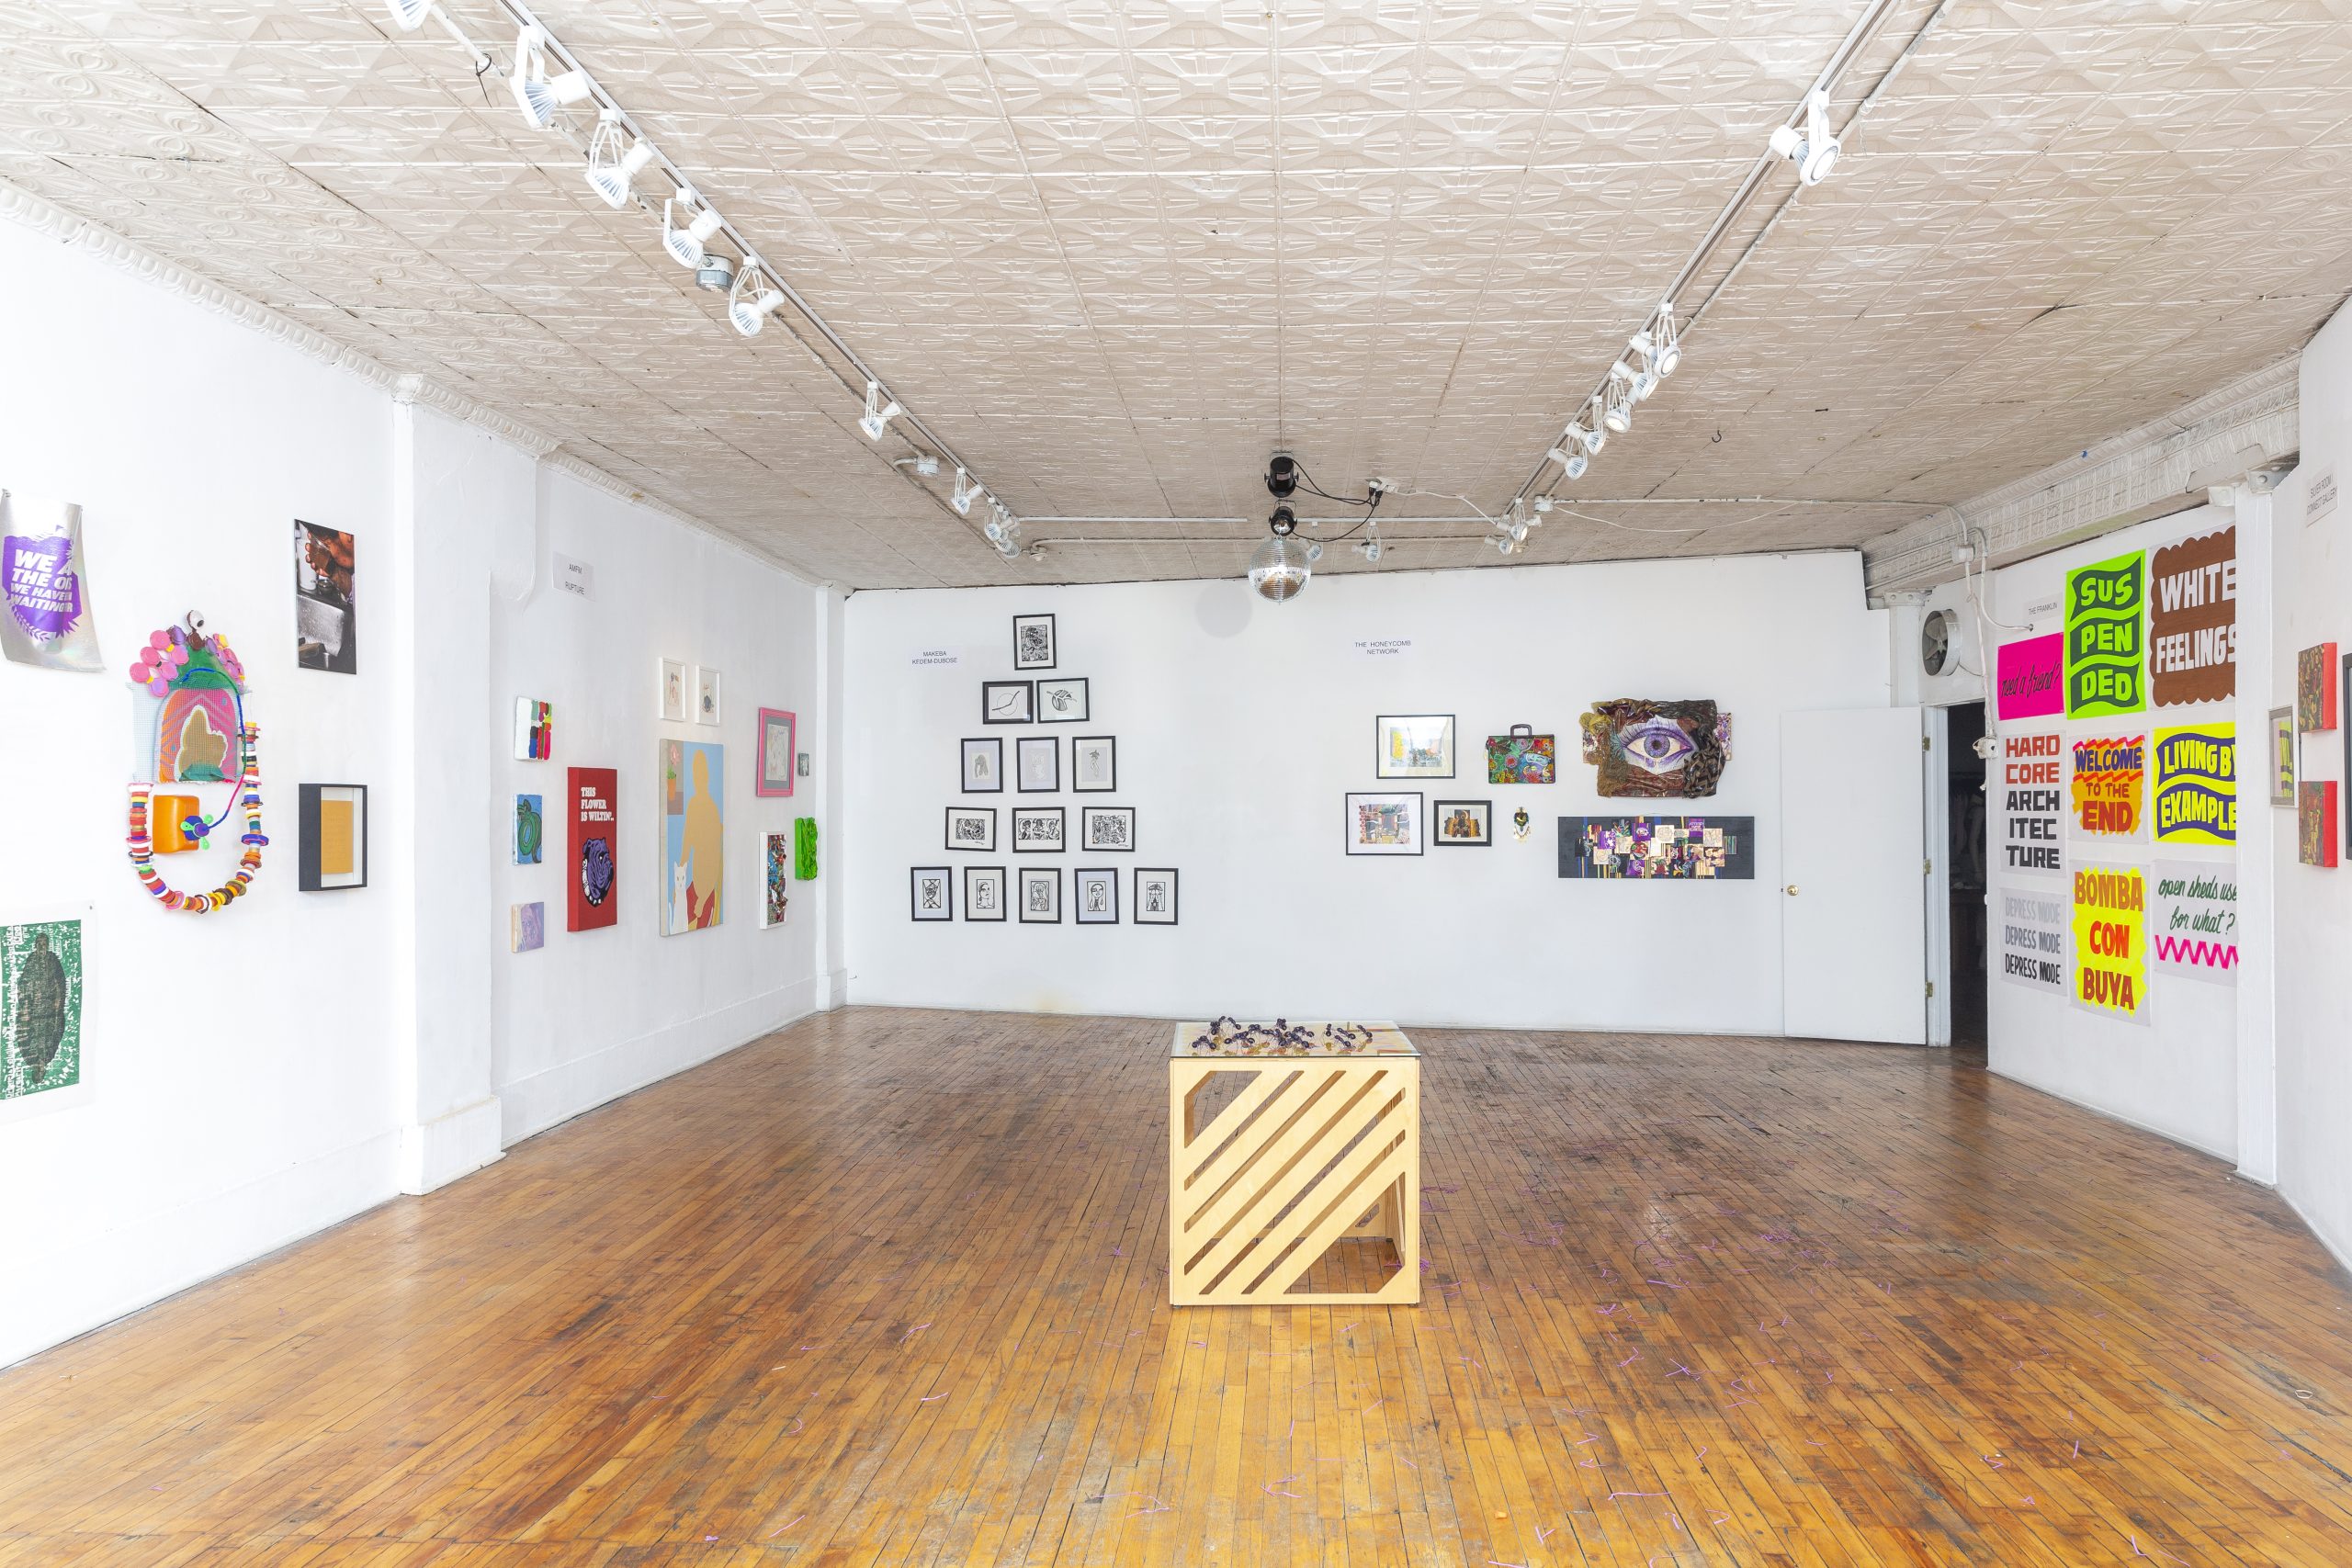 Image: Installation view of Nubes Art Fair. A golden-yellow cube sculpture with diagonable stripes sits in the center of the gallery room. Paintings, drawing and multi-media works hang on the wall.